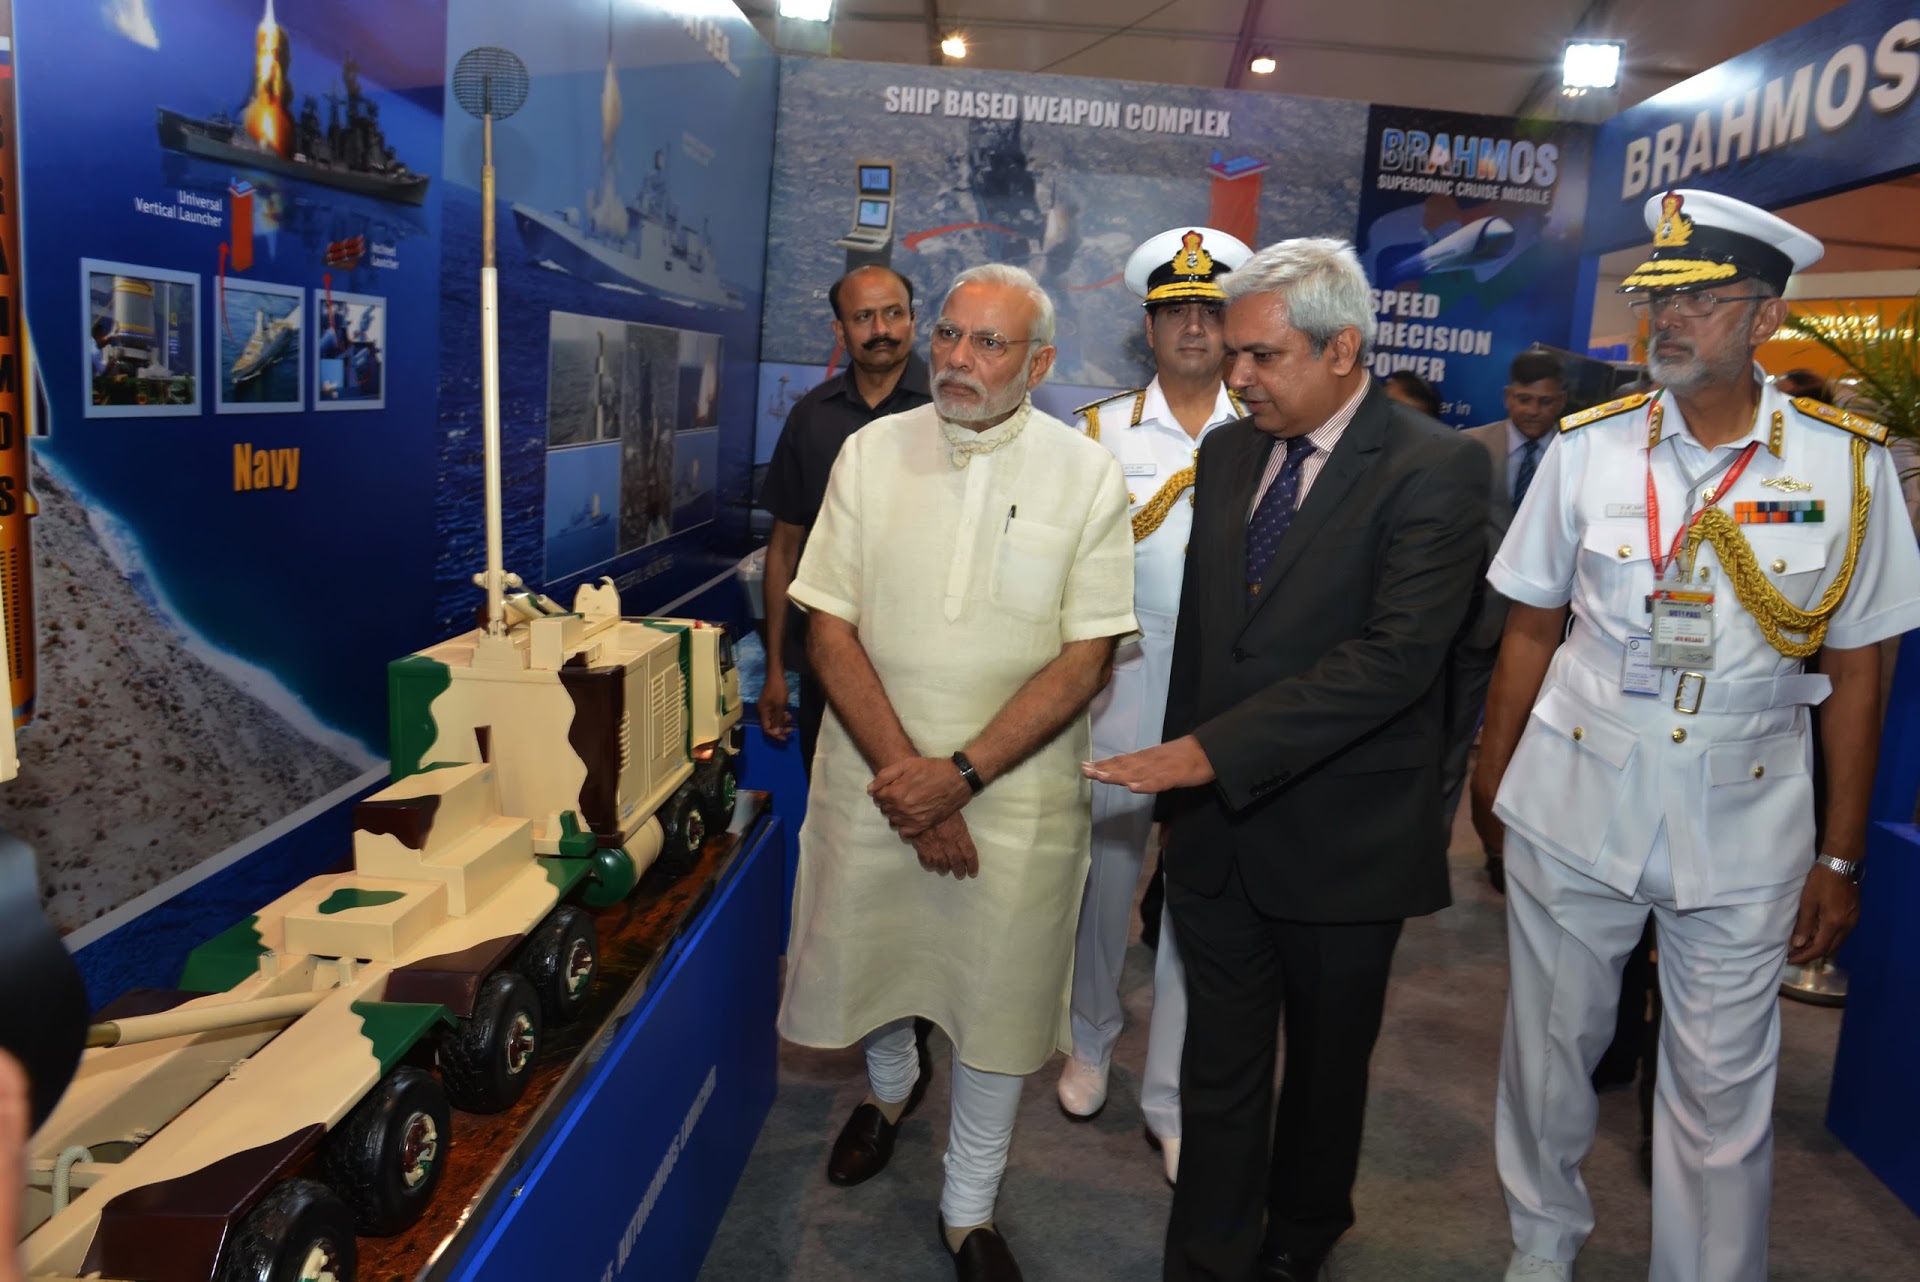 Narendra Modi was briefed about the BrahMos supersonic cruise missile system by Cdr. Ashotoosh Mehra (C).